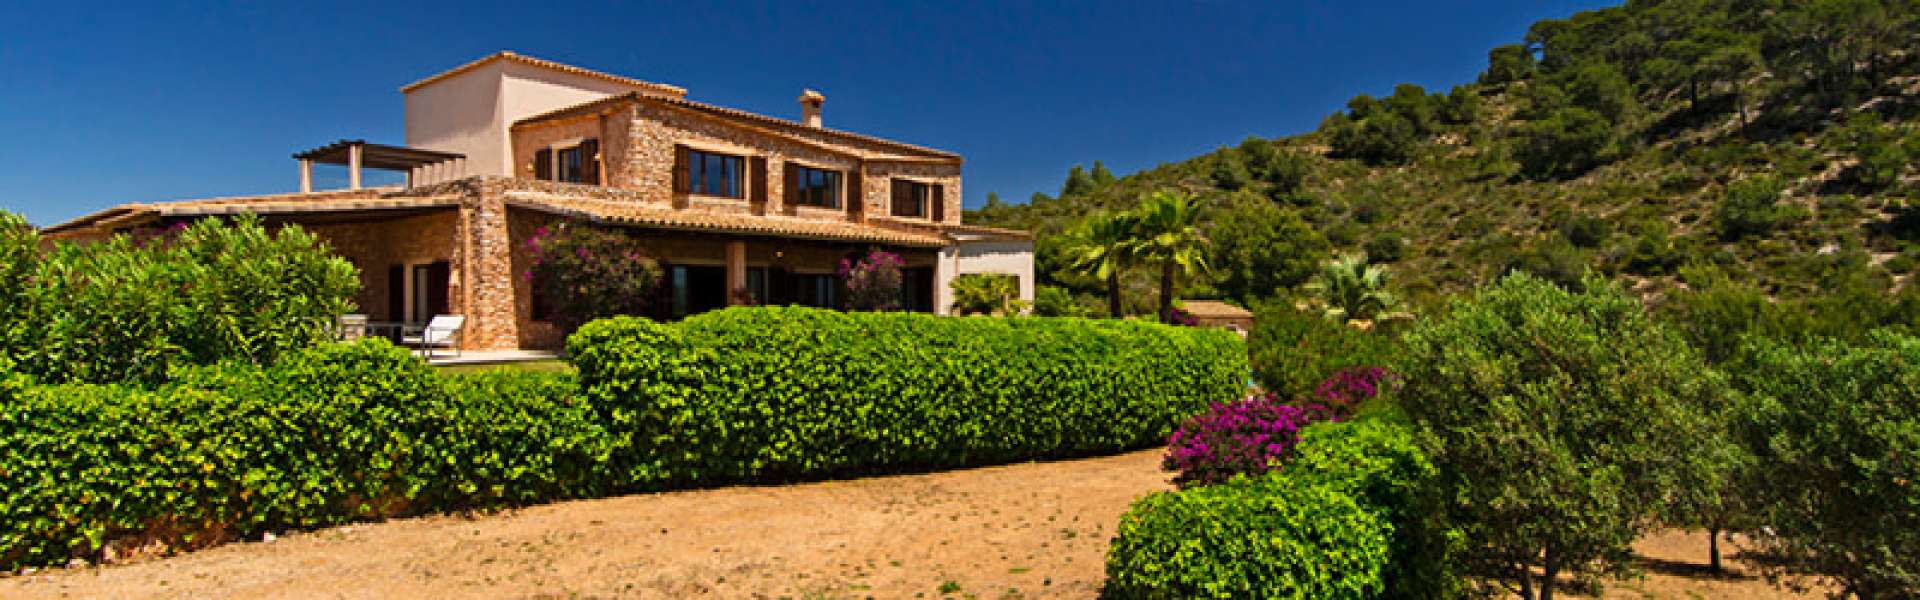 Porto Colom - Country Estate at the Golf Course Vall d'Or with spectacular seaviews